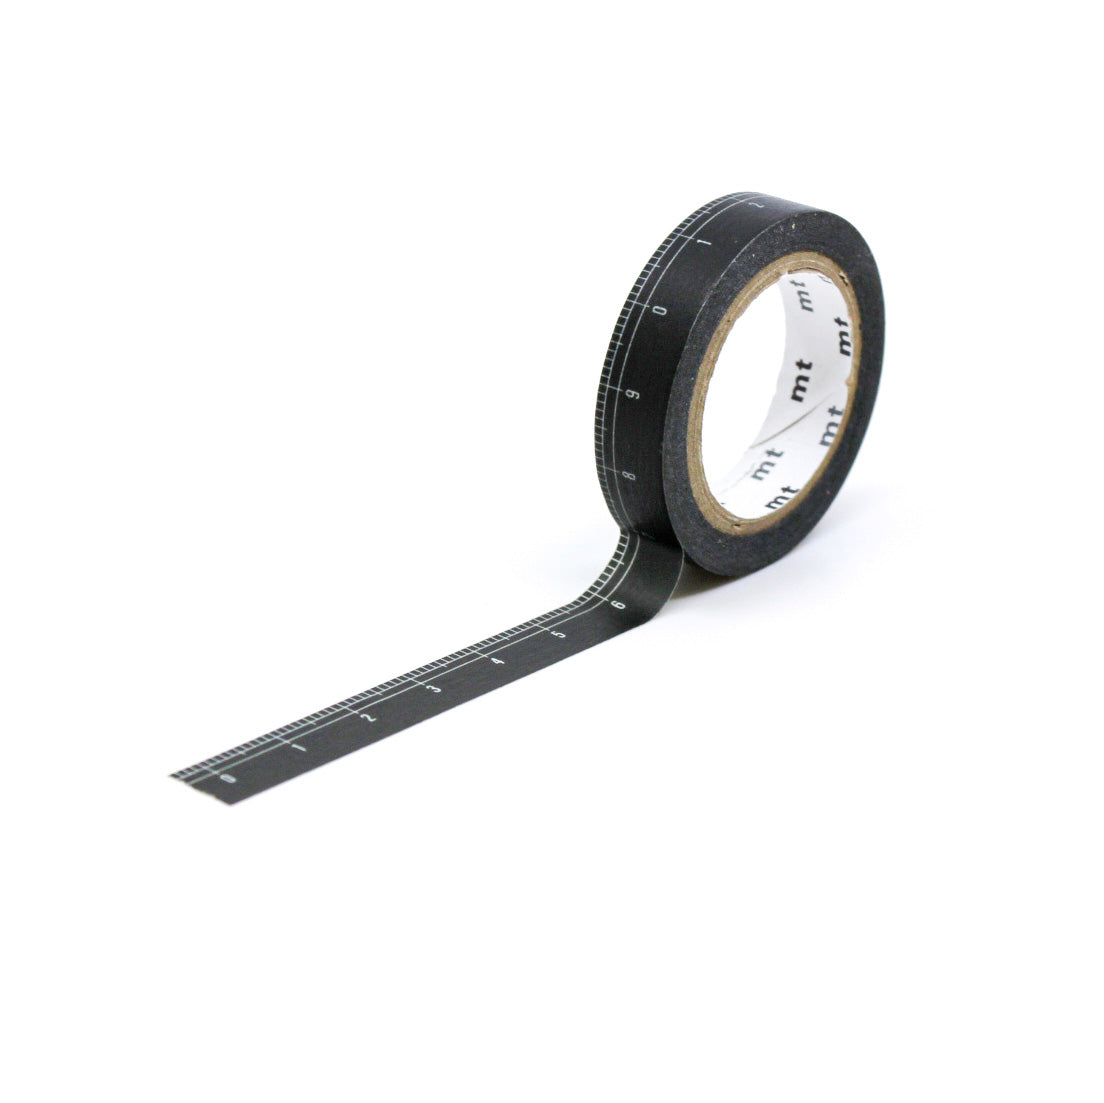 Stay organized with our thin black ruler washi tape, featuring a sleek design that mimics the appearance of a ruler, perfect for adding a practical and minimalist touch to your crafts. This tape is from MT Brand Washi tape and sold at BBB Supplies Craft Shop.